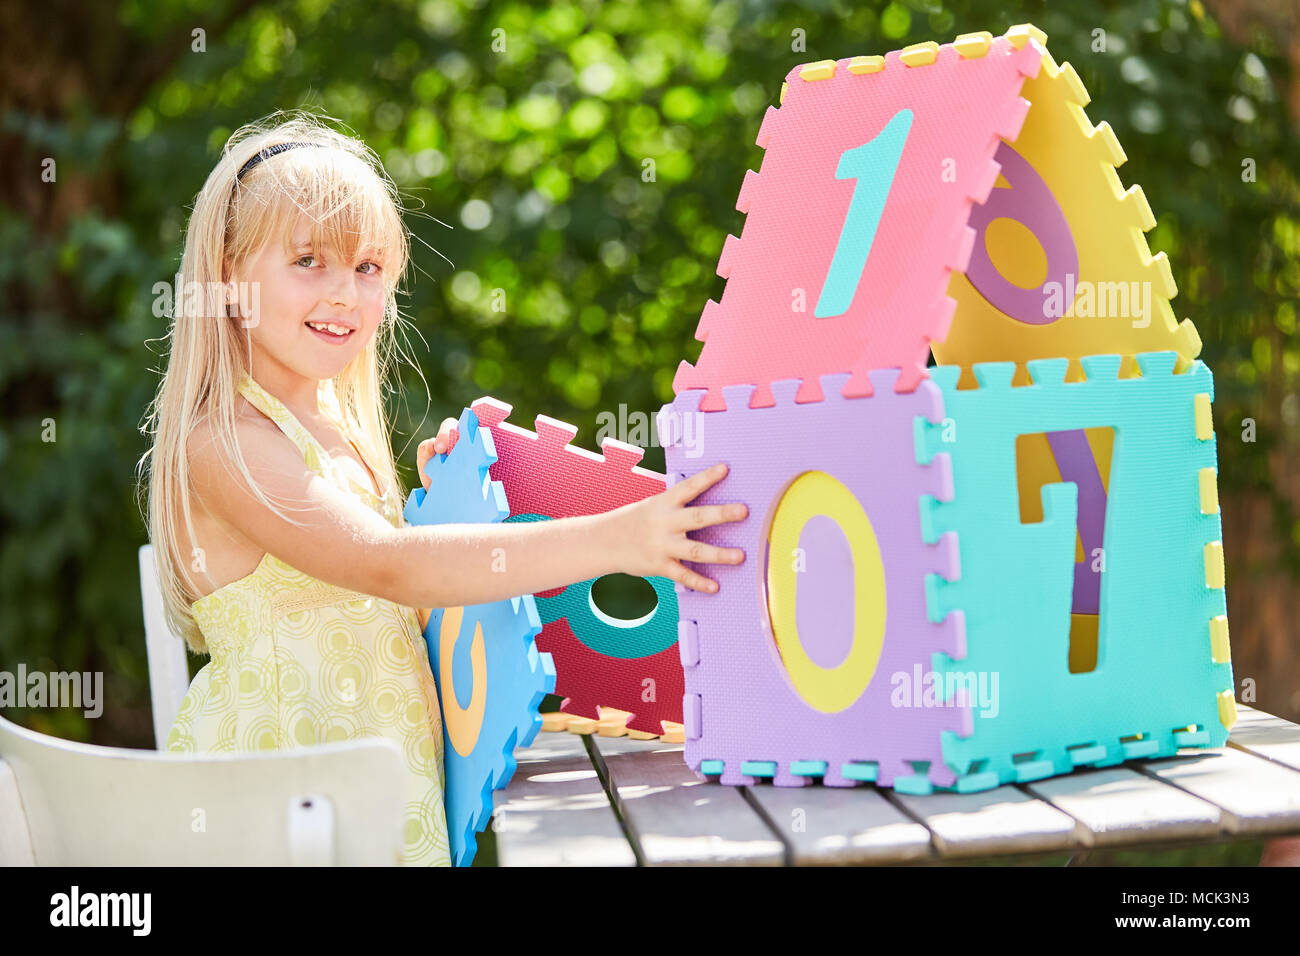 Blonde girl builds a miniature house out of puzzle pieces as a dream house Stock Photo